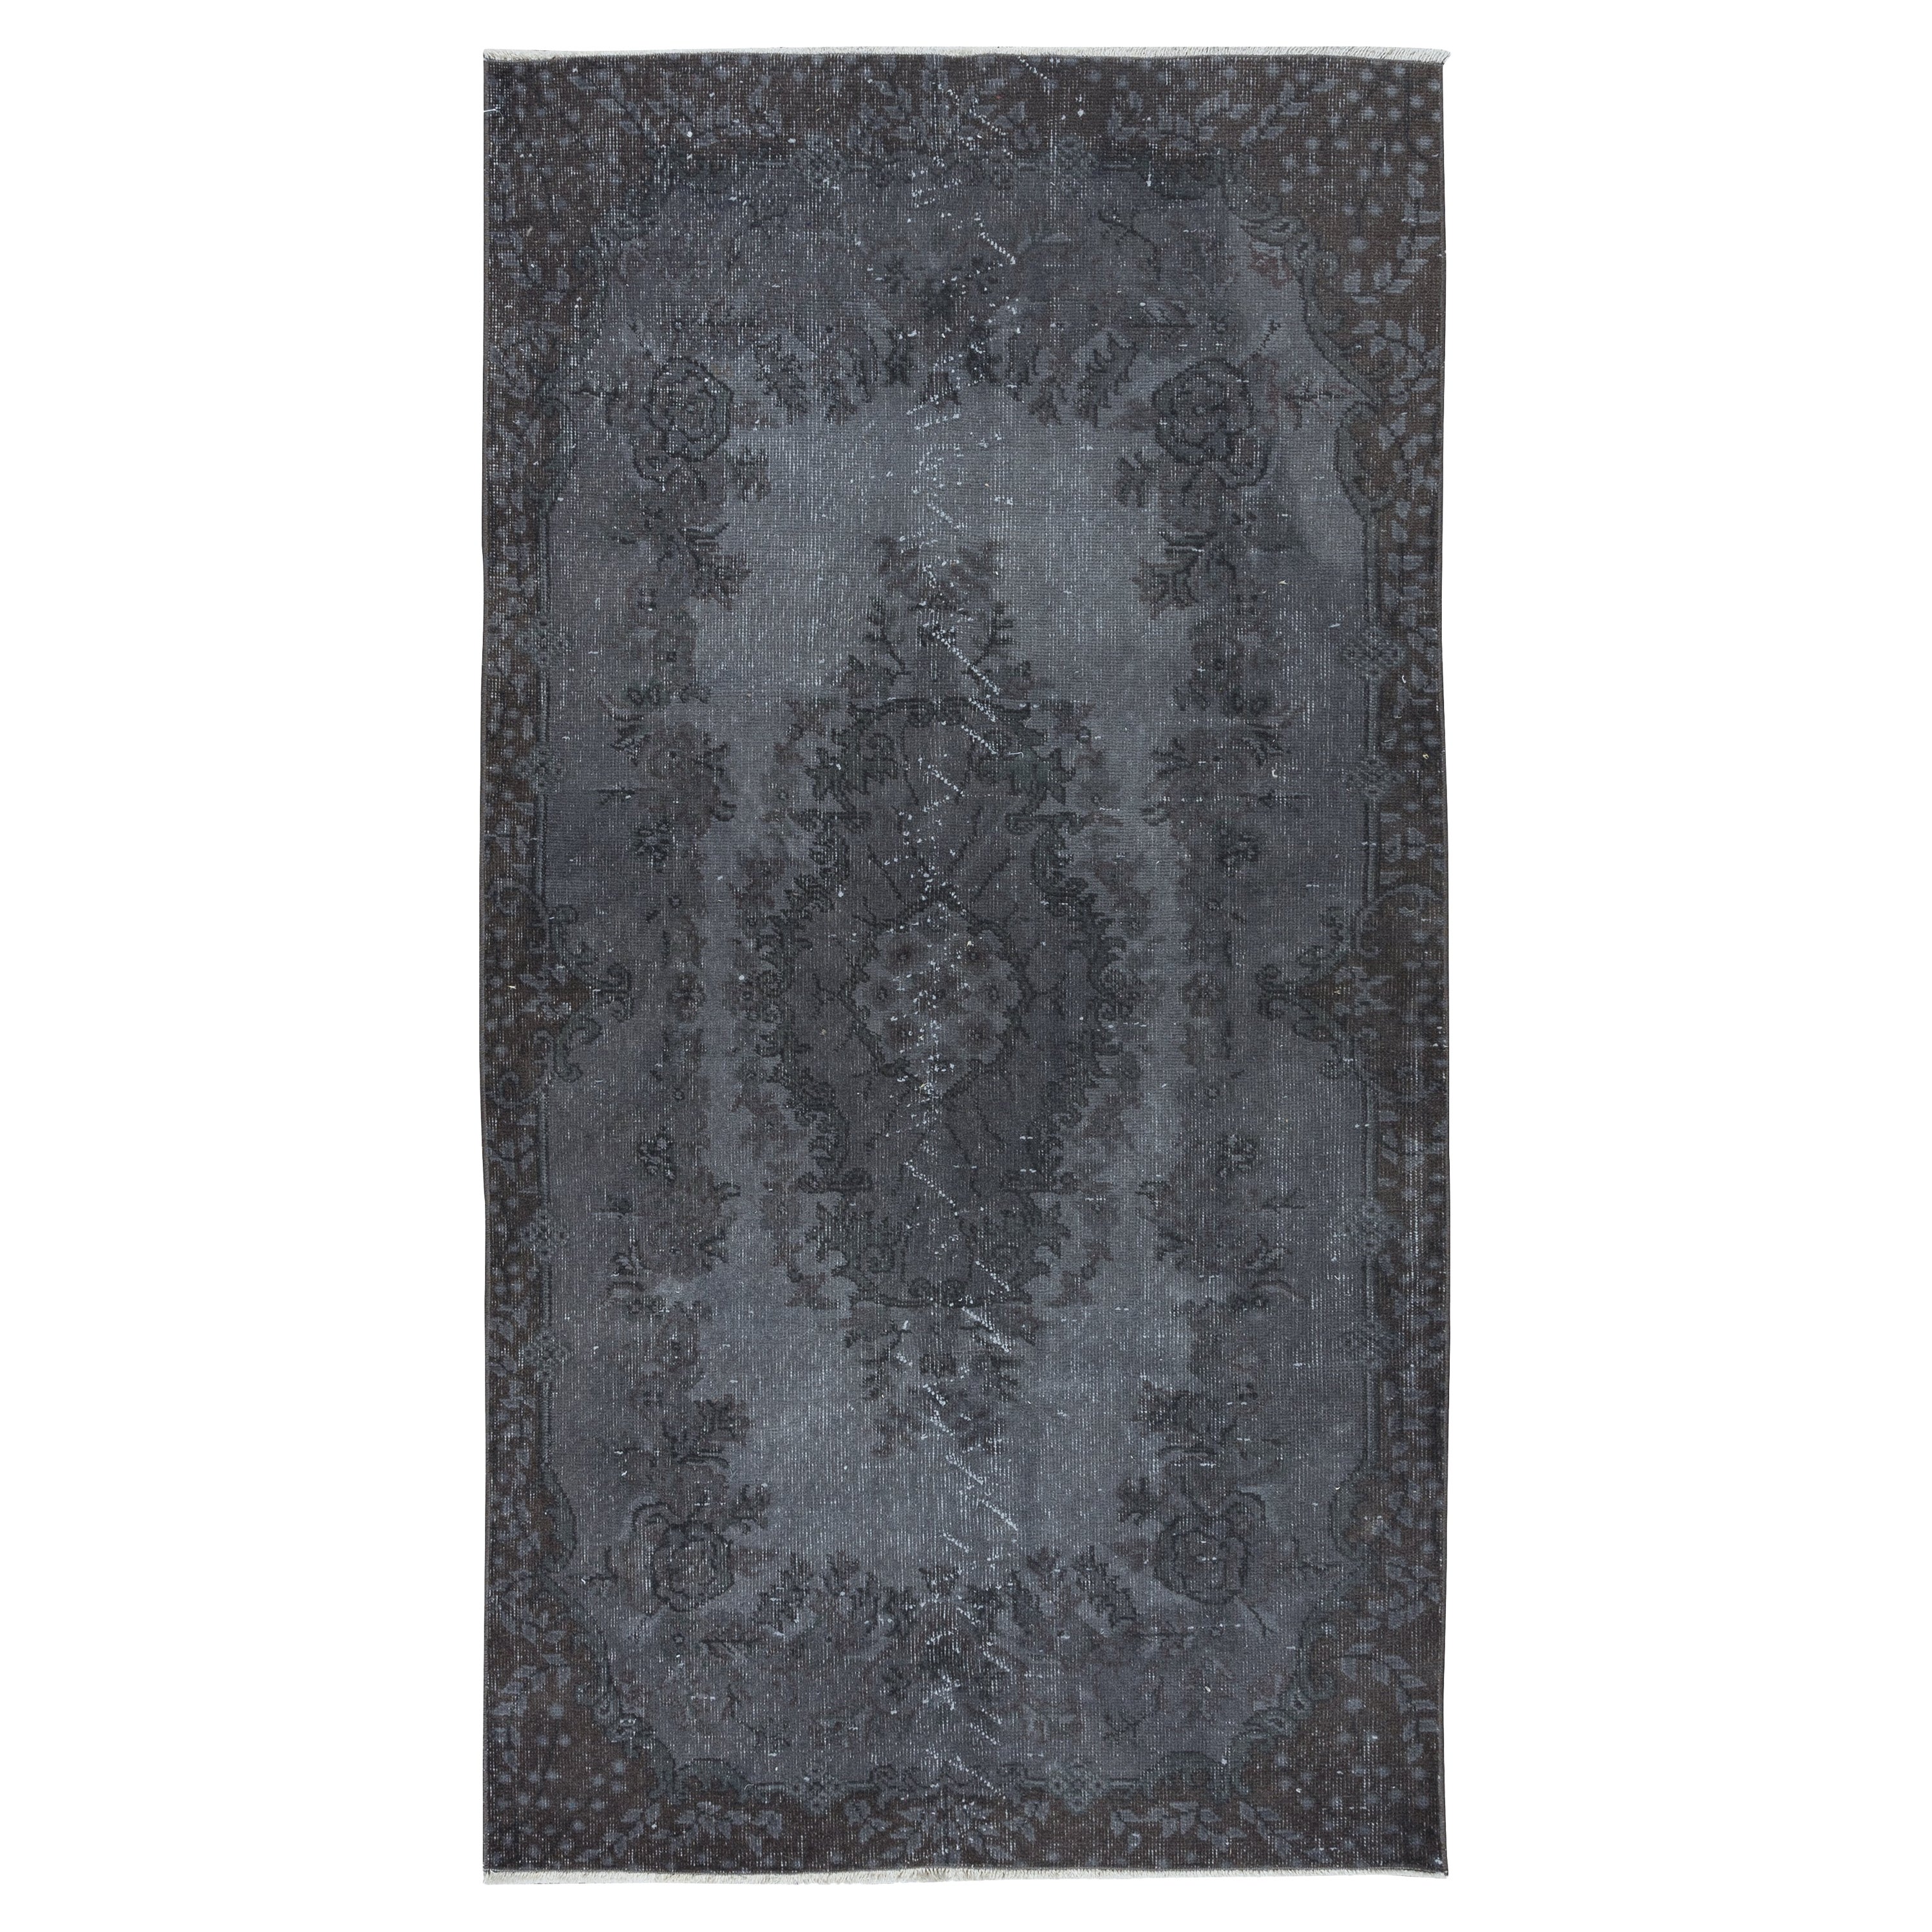 3.7x6.8 Ft Handmade Turkish Area Rug in Gray Tones, Ideal for Modern Interiors For Sale